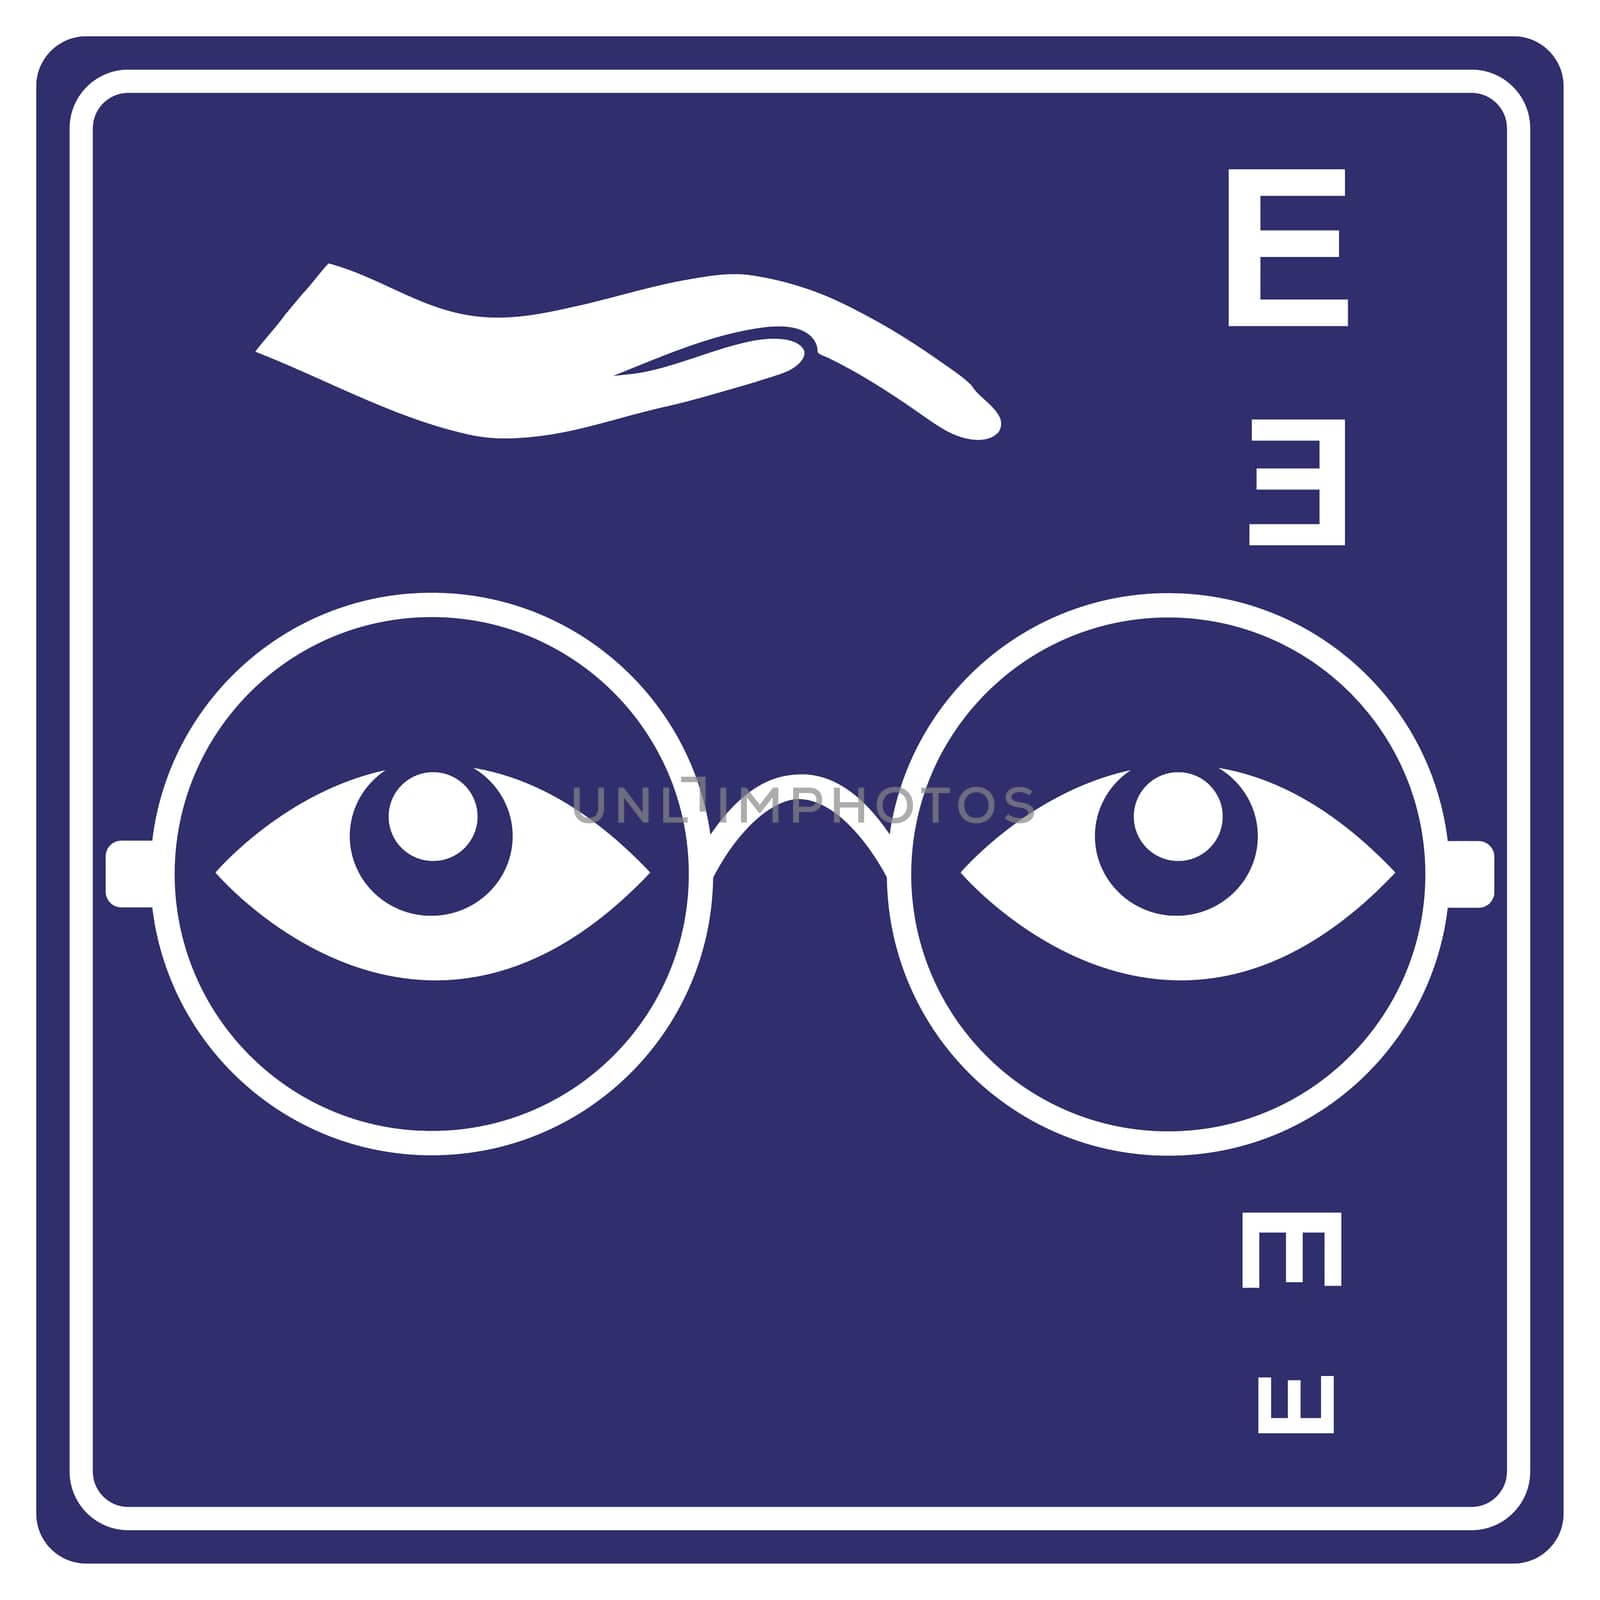 Business sign for opticians, eye doctors, eye clinics